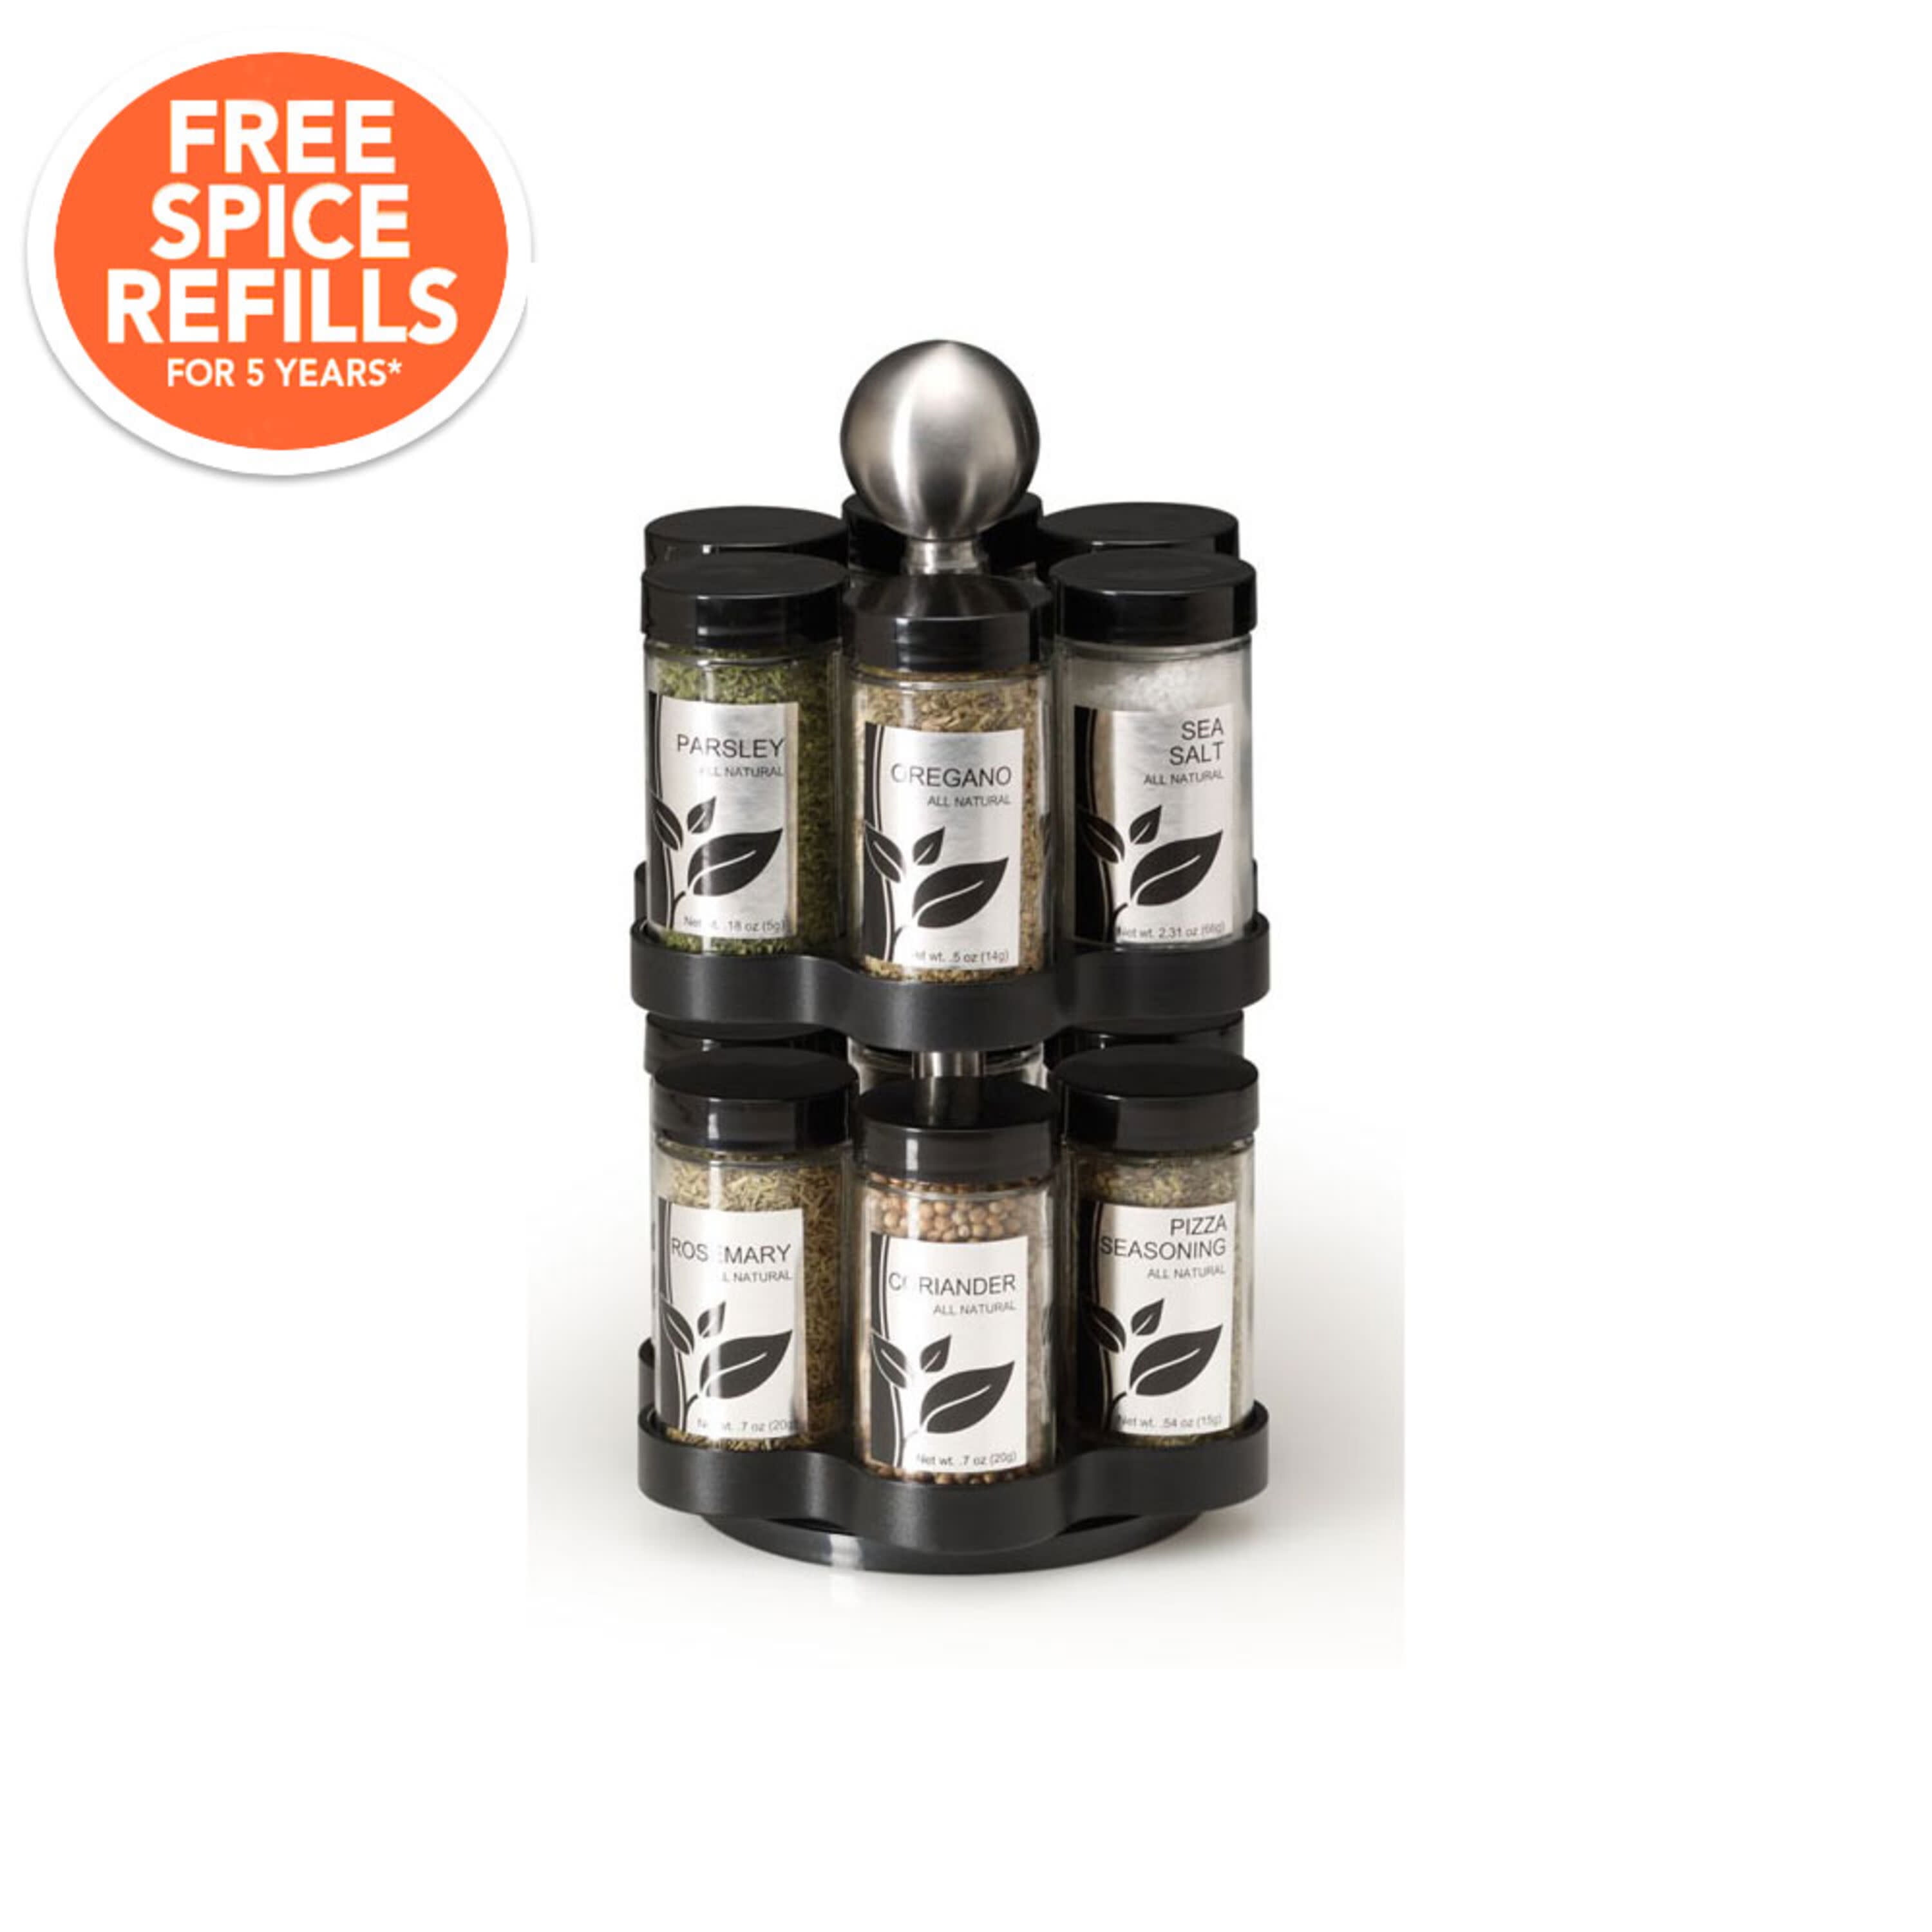 Kamenstein 15 Jar Lincoln Countertop Spice Rack with Spices Included, FREE  Spice Refills for 5 Years, Chrome with Black Caps , 9.5 x 5.8 x 9